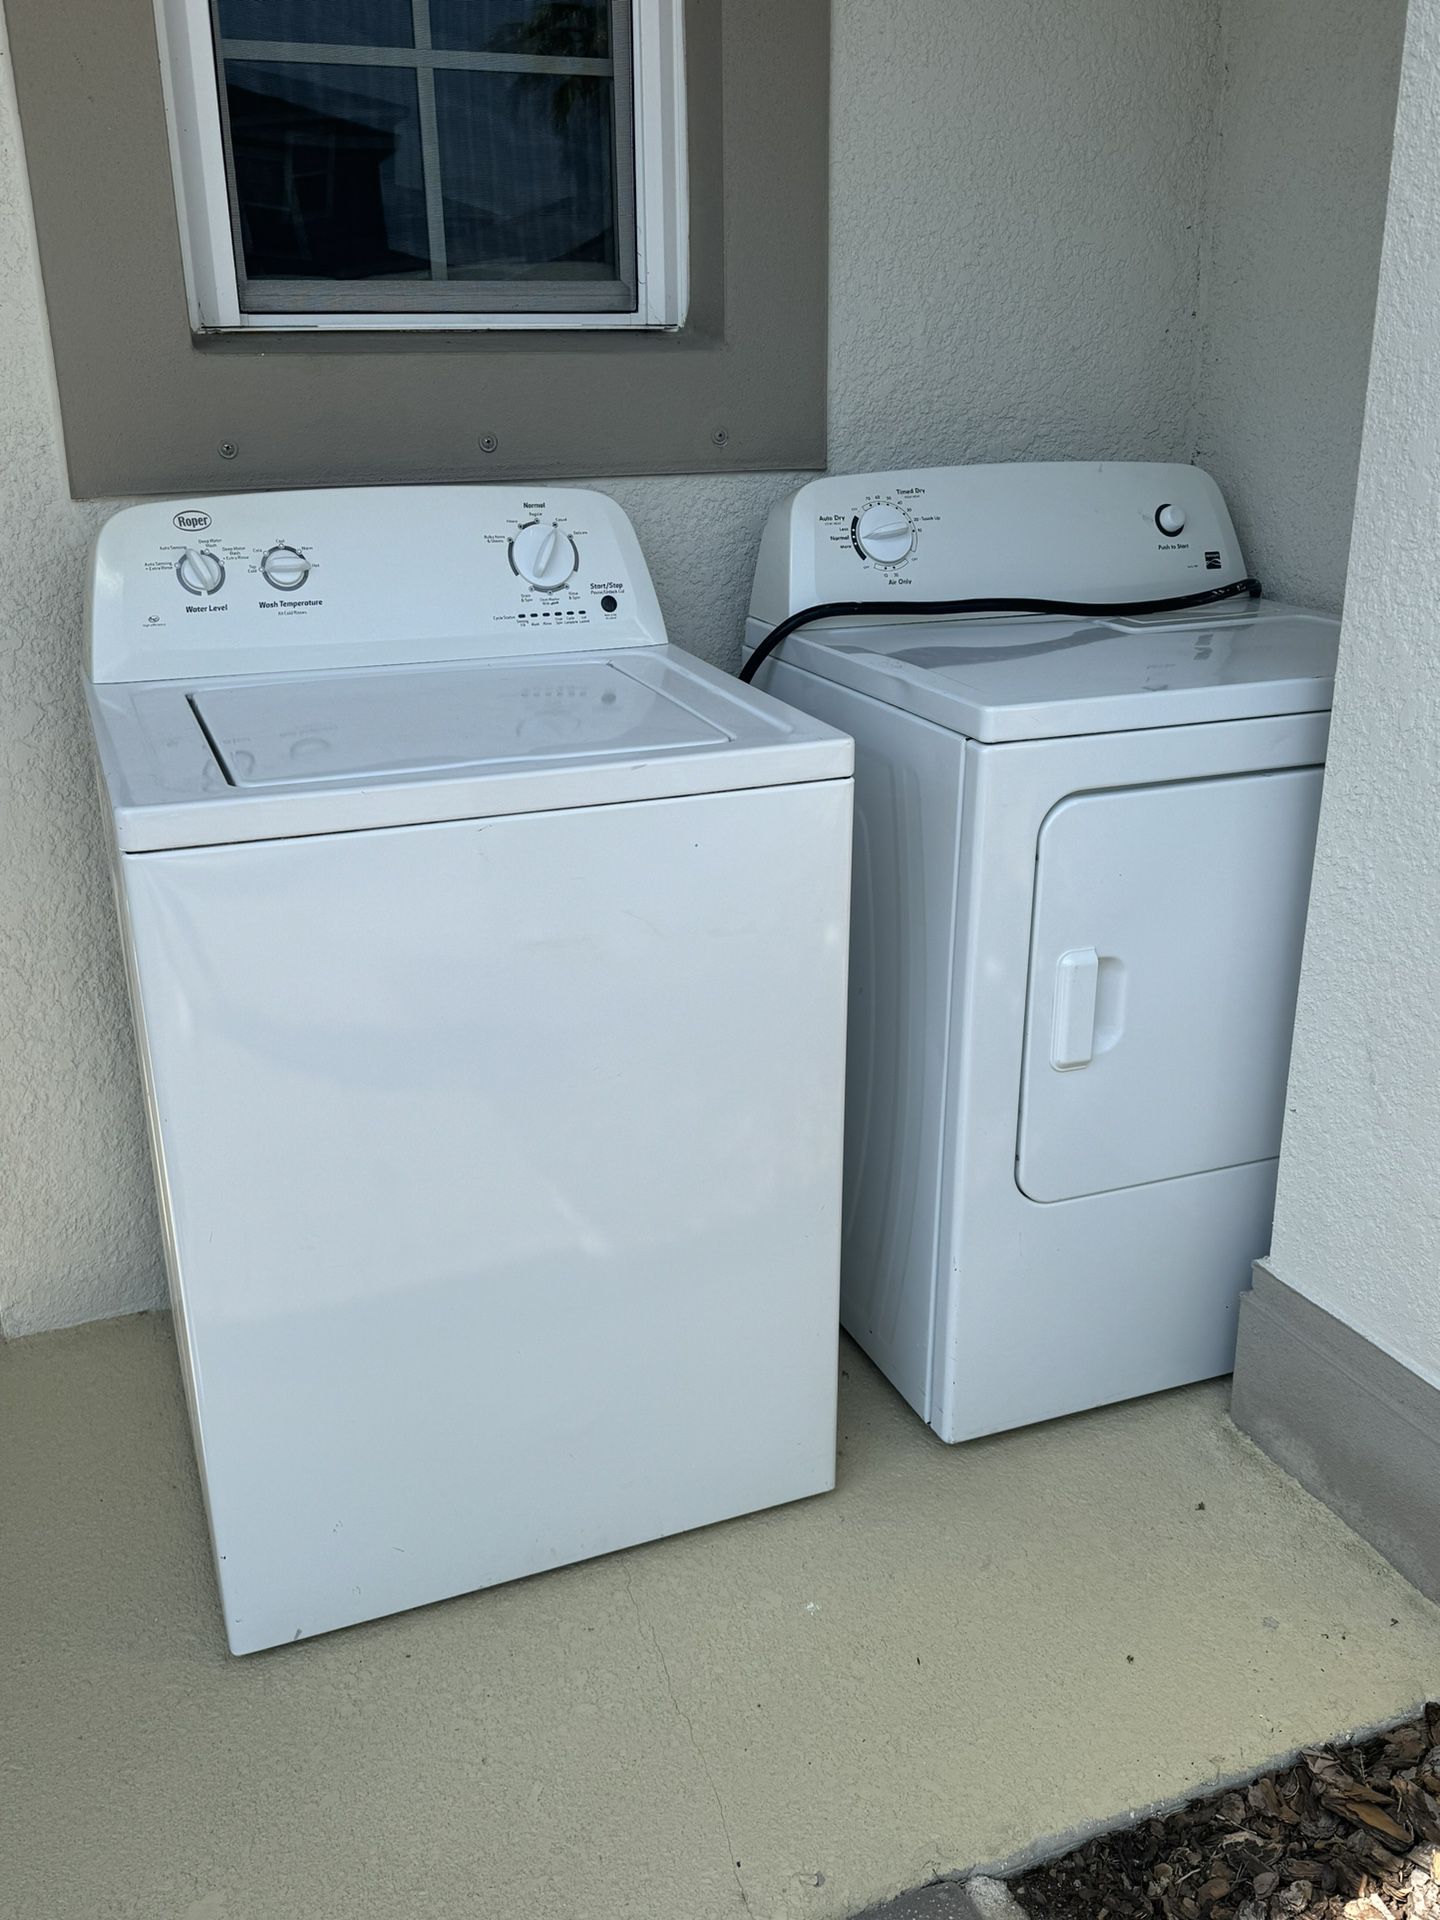 Used Washer And Dryer - Both For $100